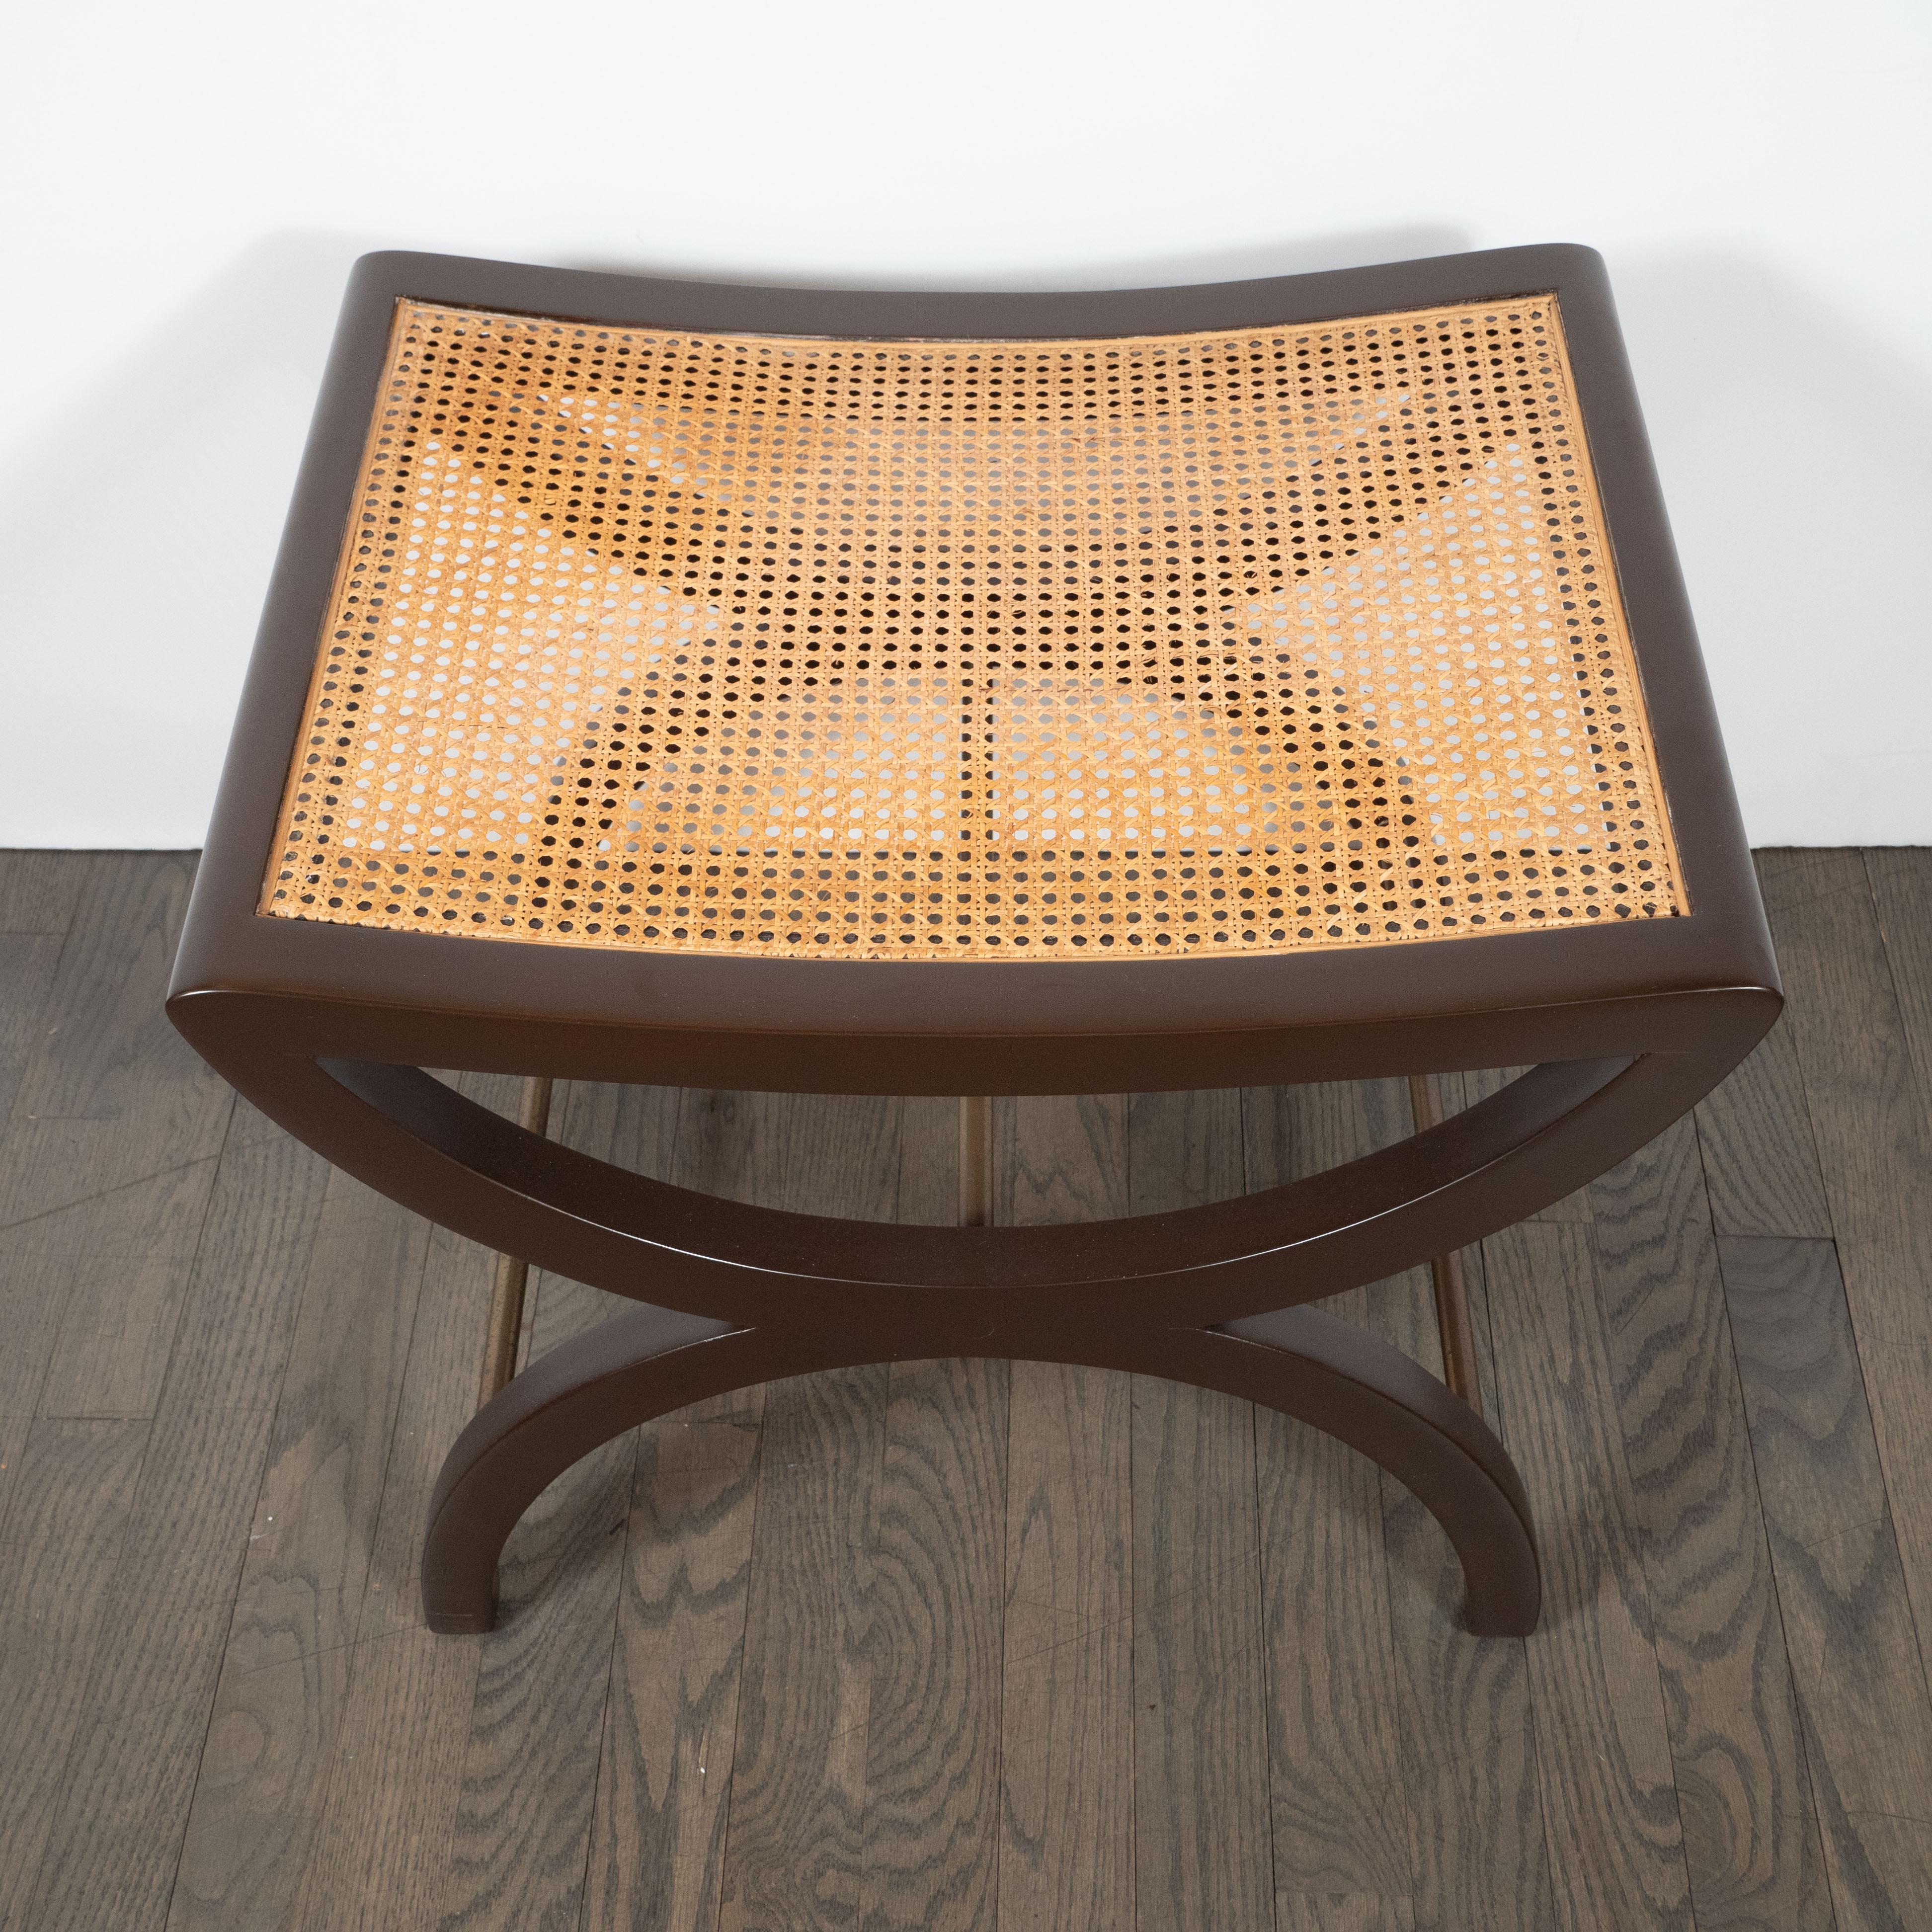 This elegant stool was designed by Edward Wormley for the Dunbar Furniture Company, circa 1960. Wormley, celebrated for the refined materiality and meticulous craftsmanship of his design pieces, created works that were thoroughly modern but often